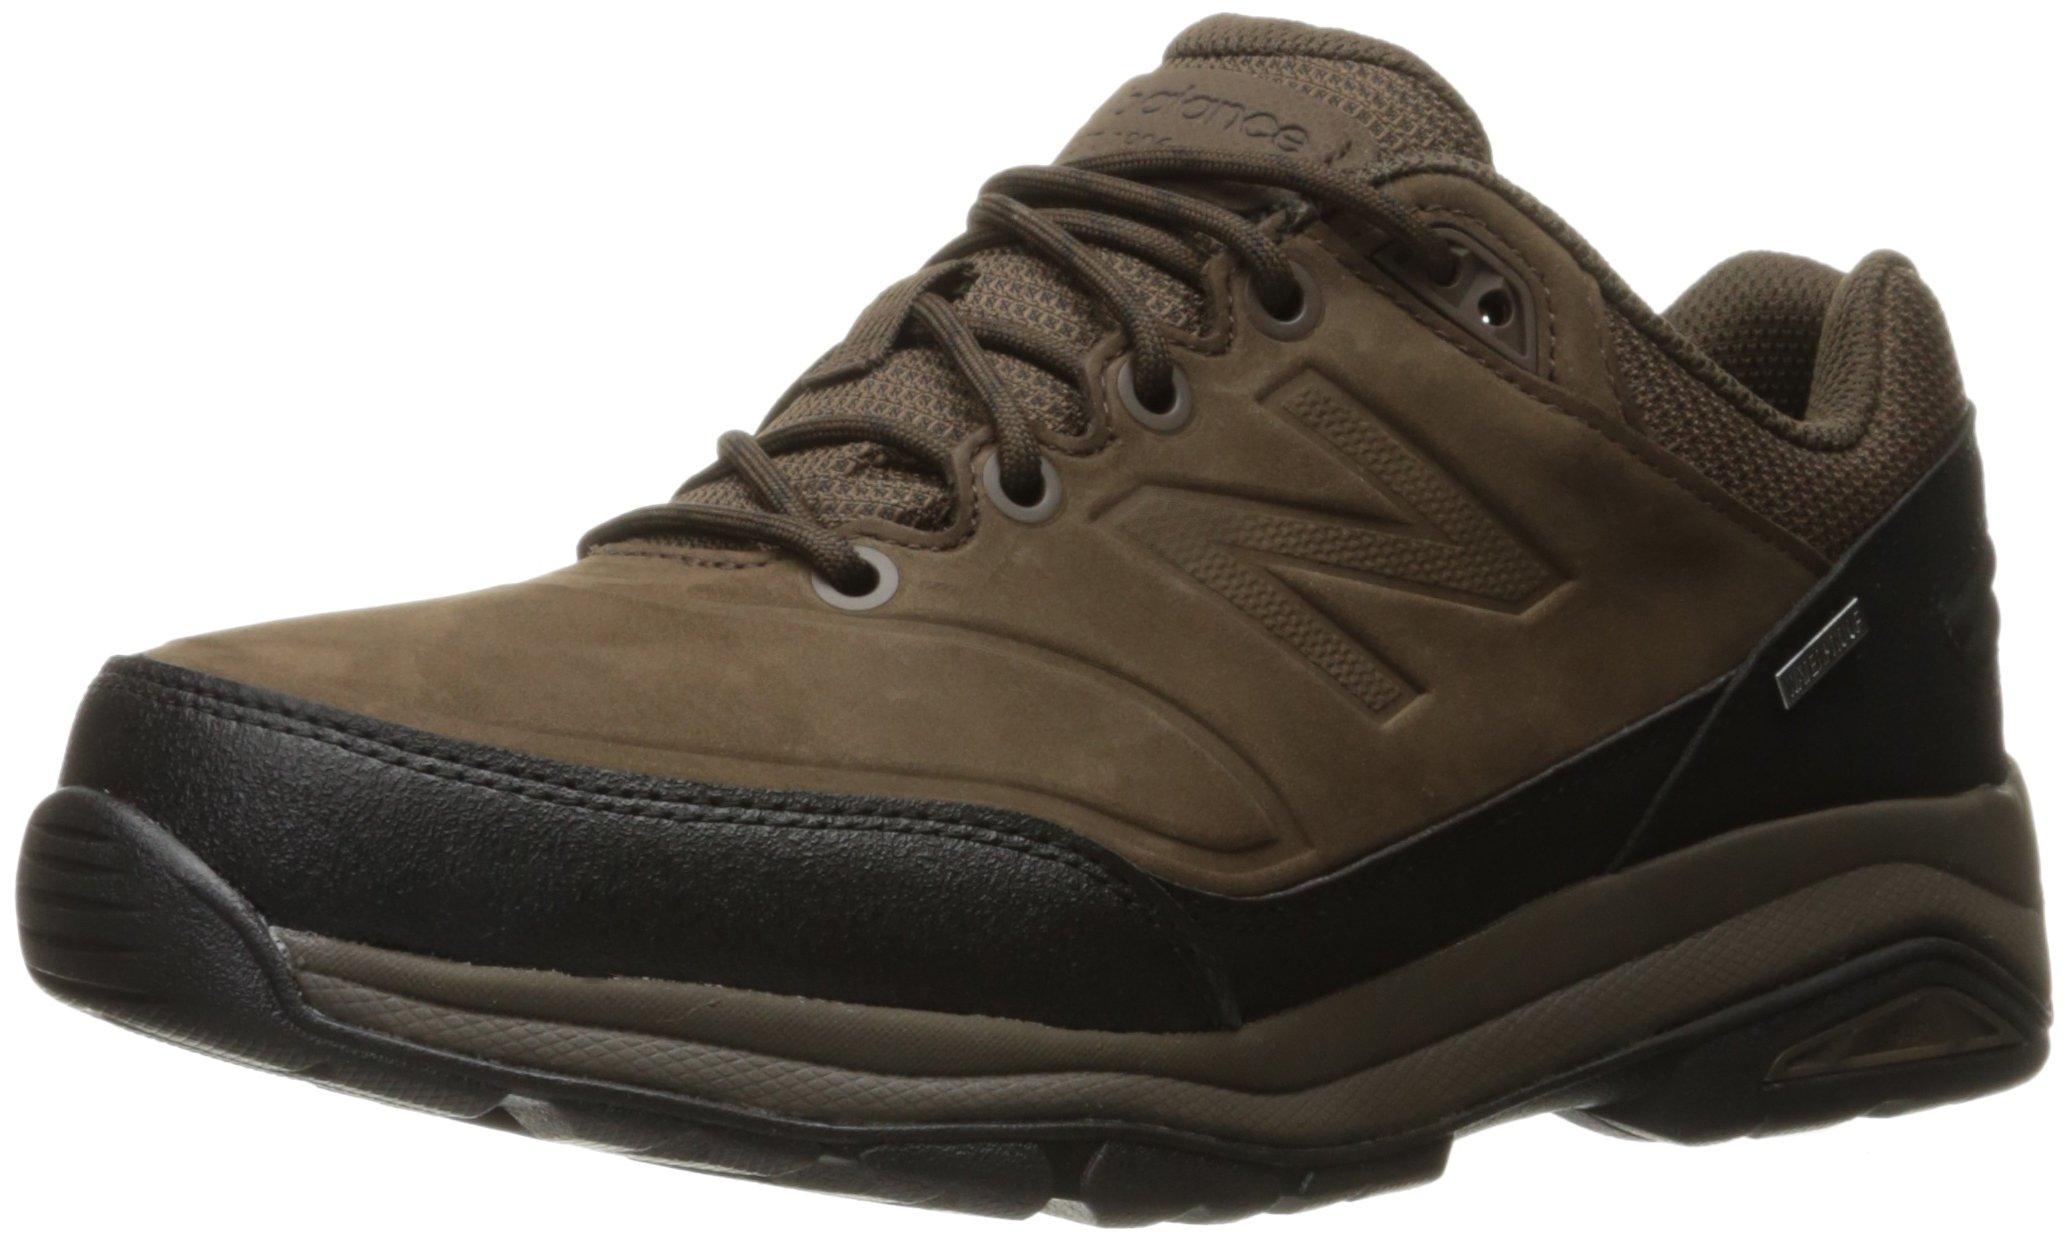 New Balance Leather 1300 V1 Trail Walking Shoe in Chocolate (Brown) for ...